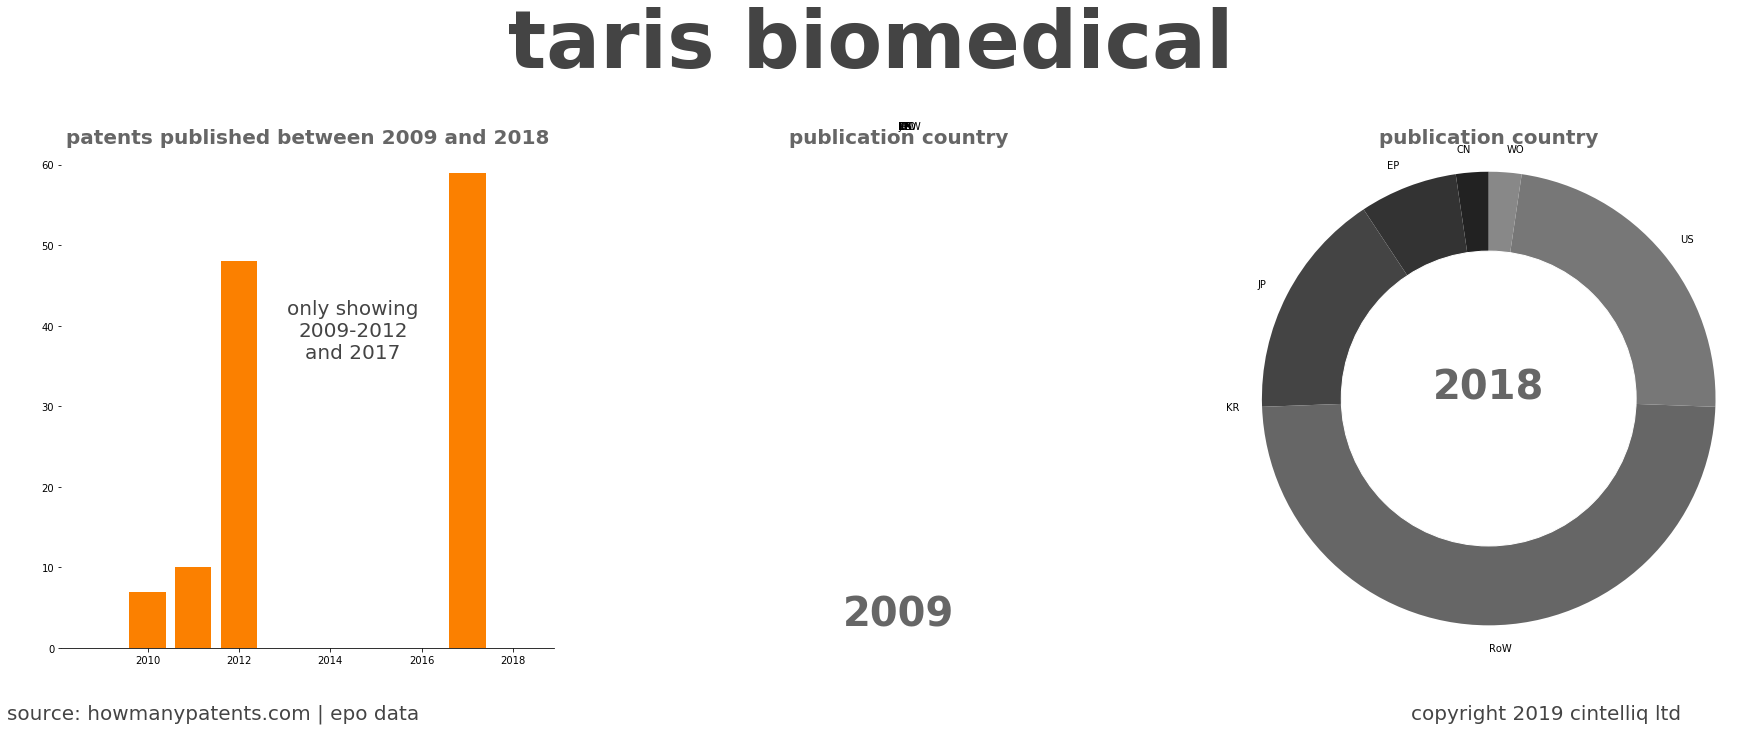 summary of patents for Taris Biomedical